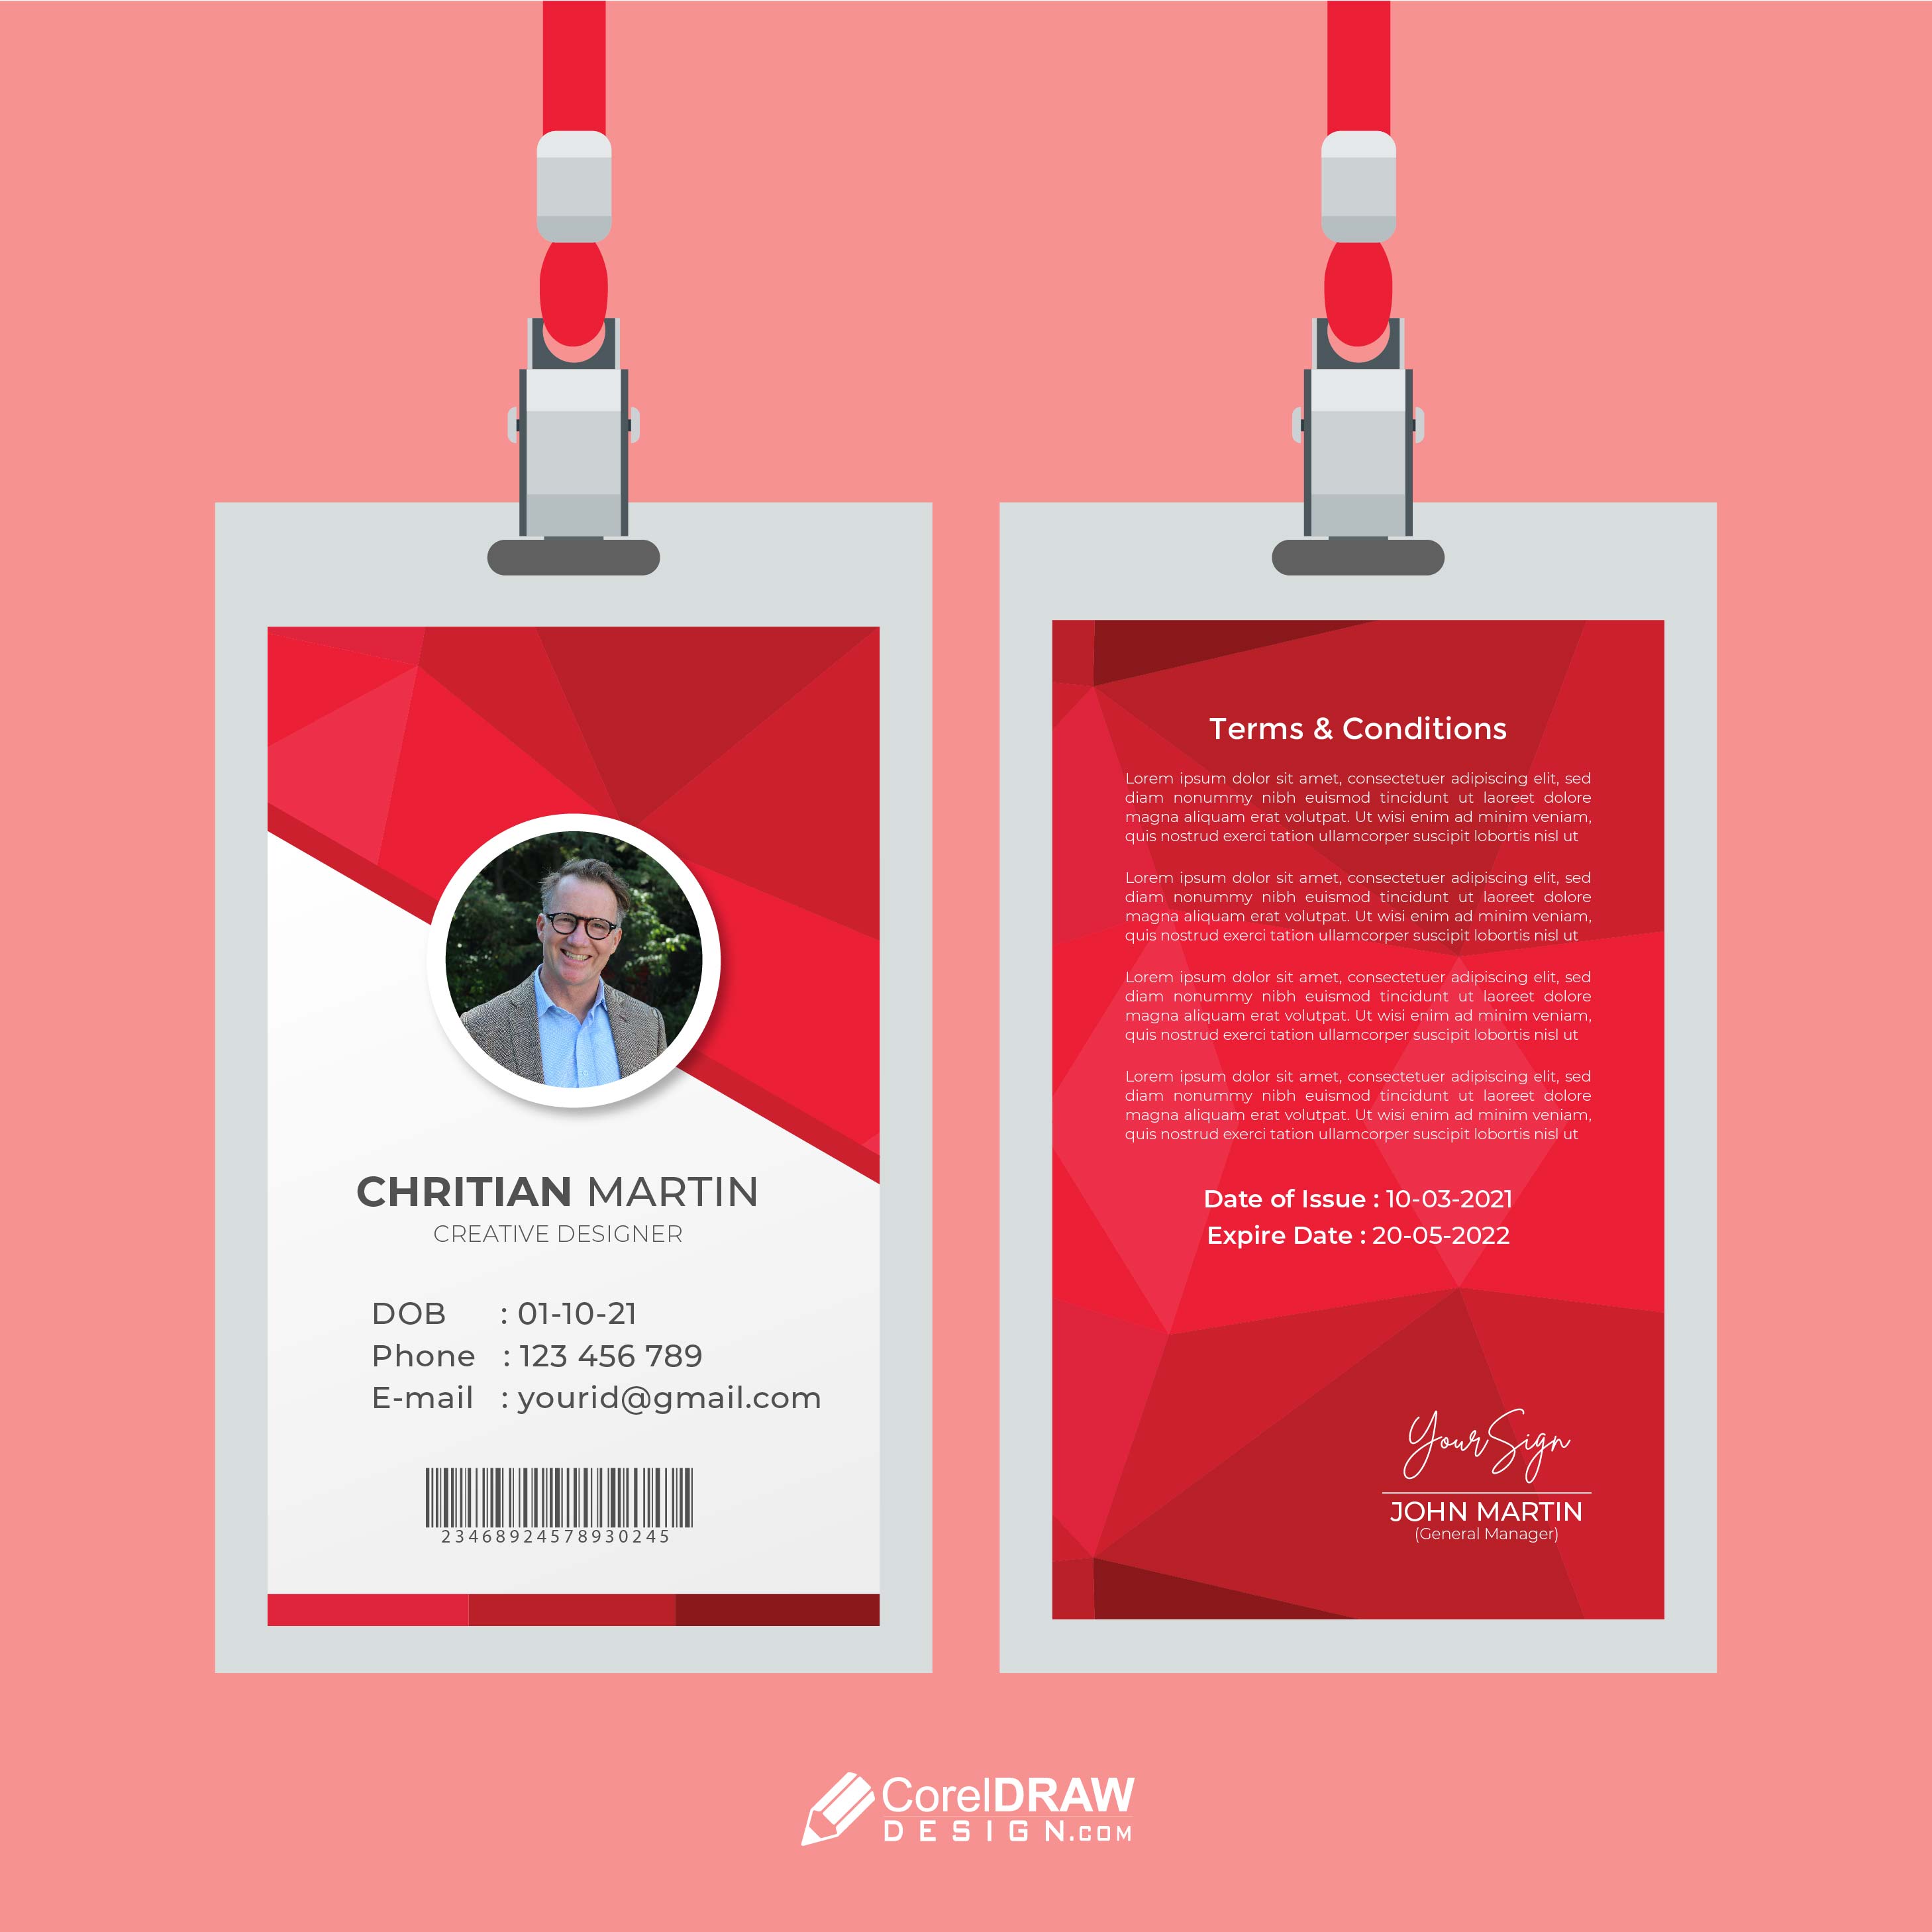 download-abstract-corporate-id-card-template-coreldraw-design